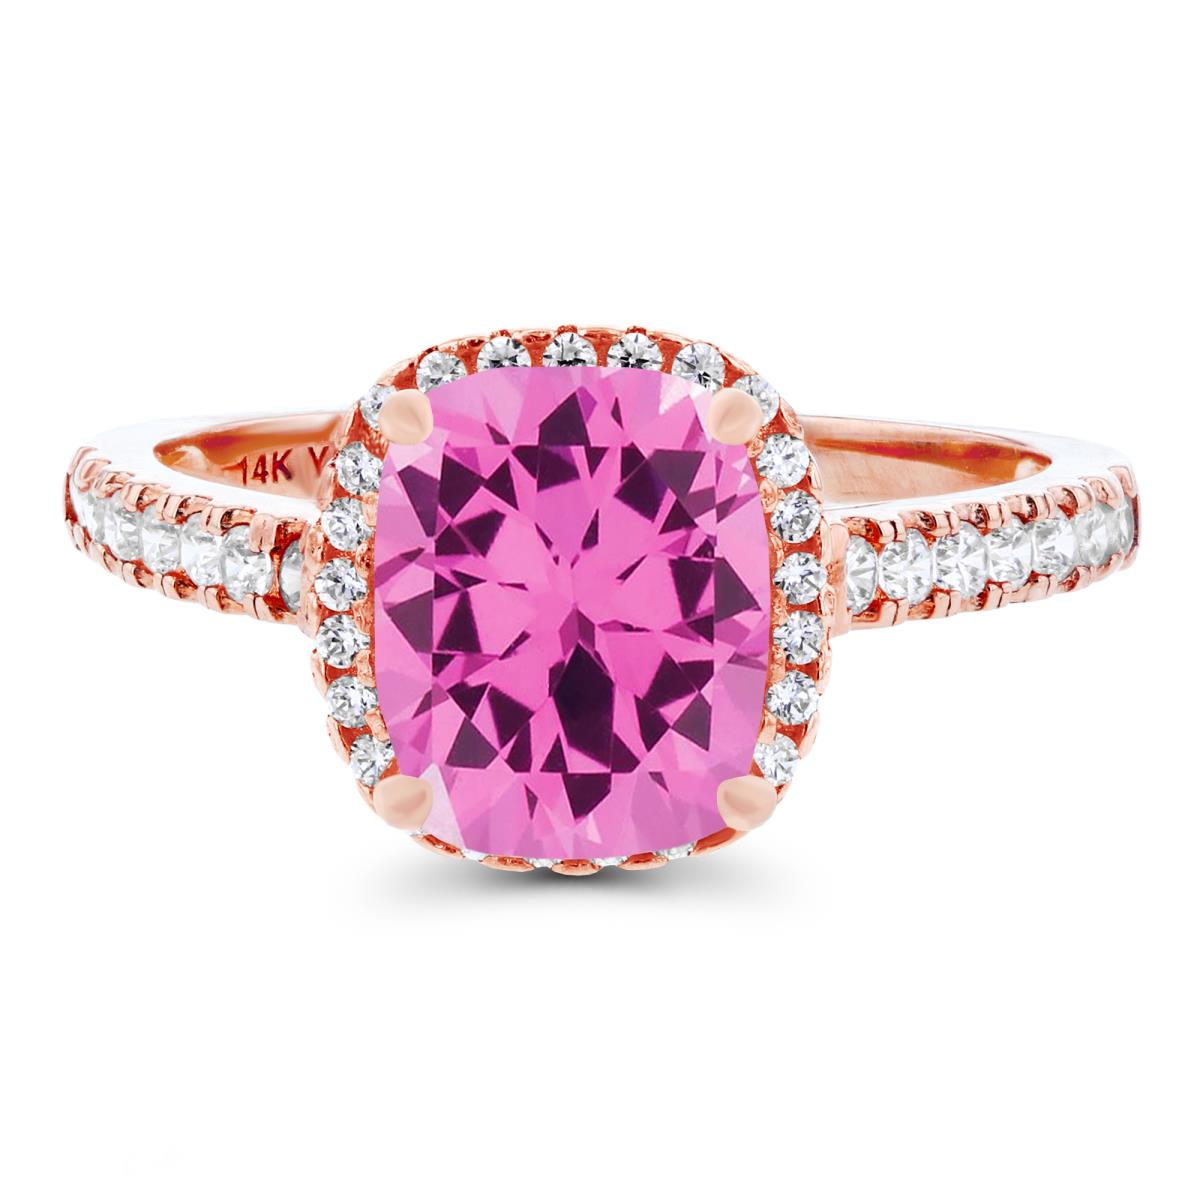 14K Rose Gold 9x7mm Cushion Created Pink Sapphire & Created White Sapphire Halo Ring